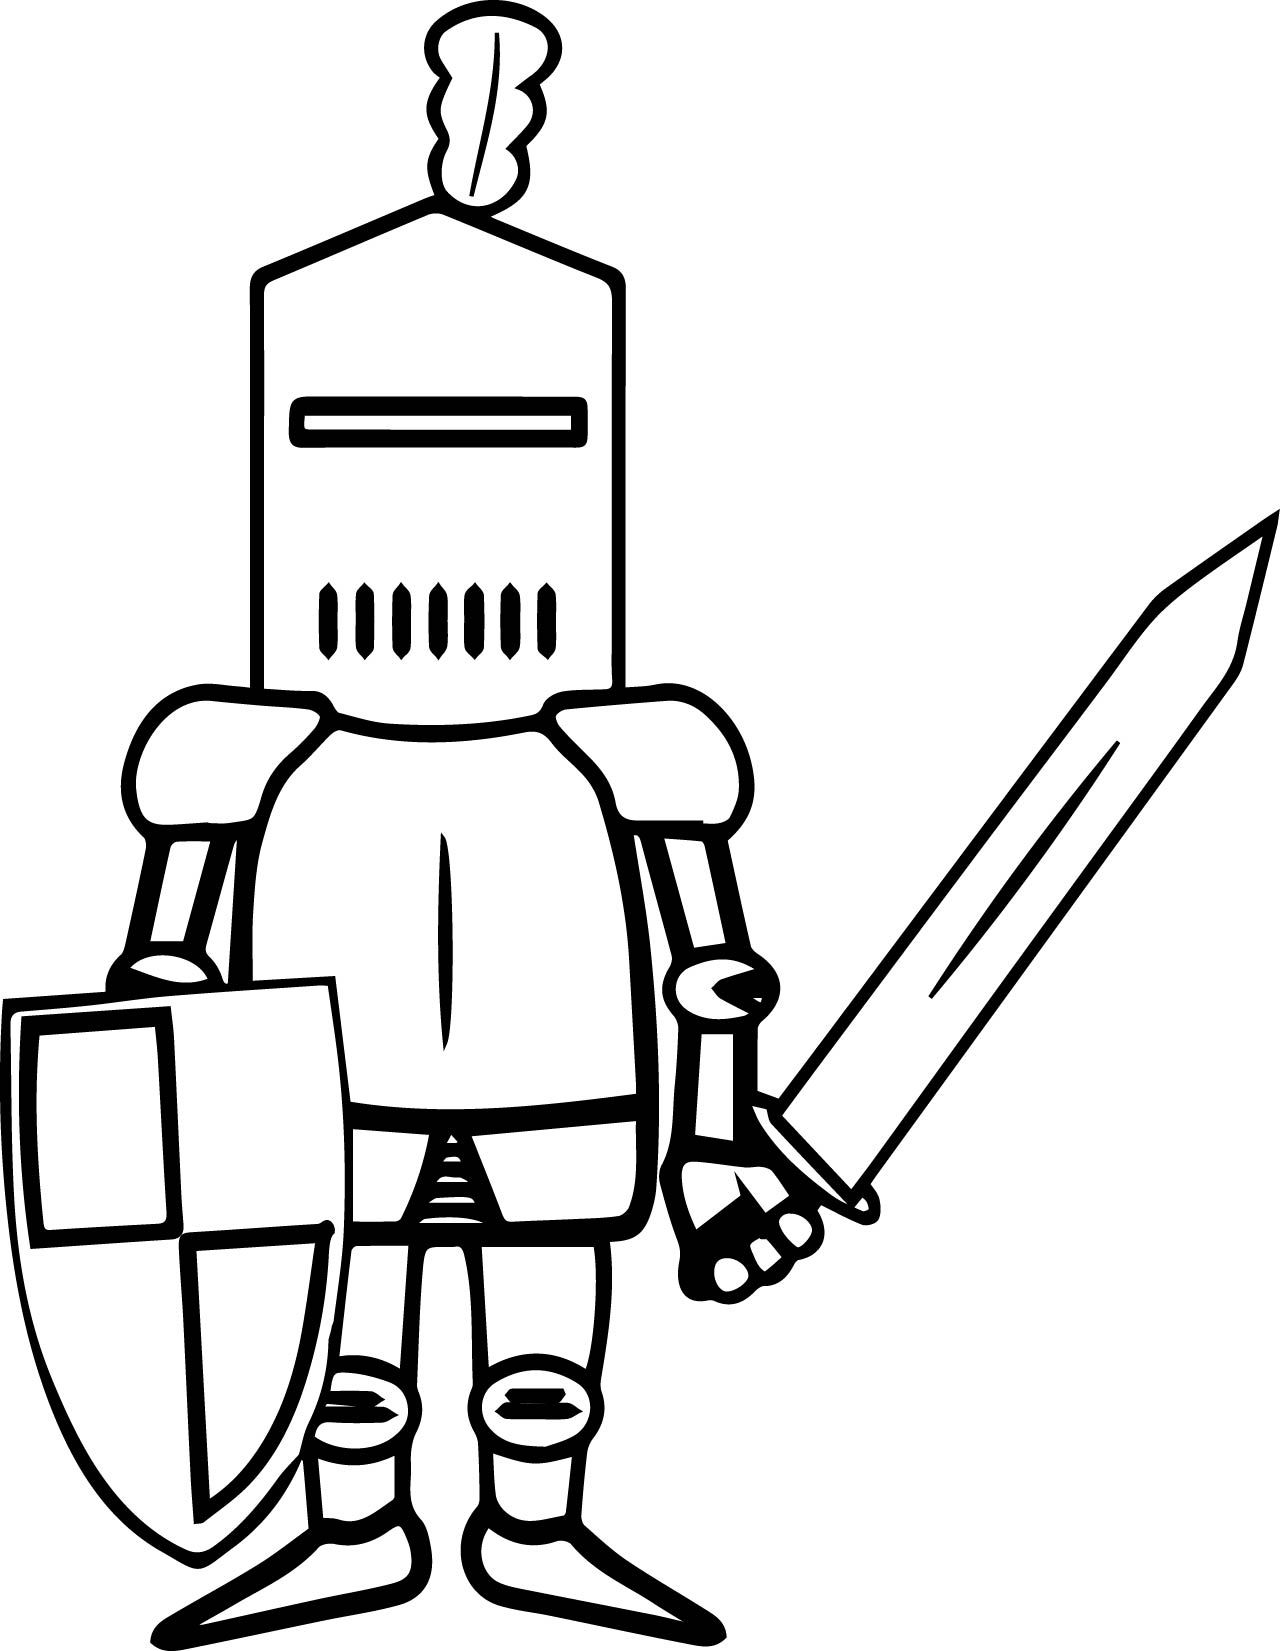 Knight Sword Coloring Page | Knight sword, Coloring pages ...